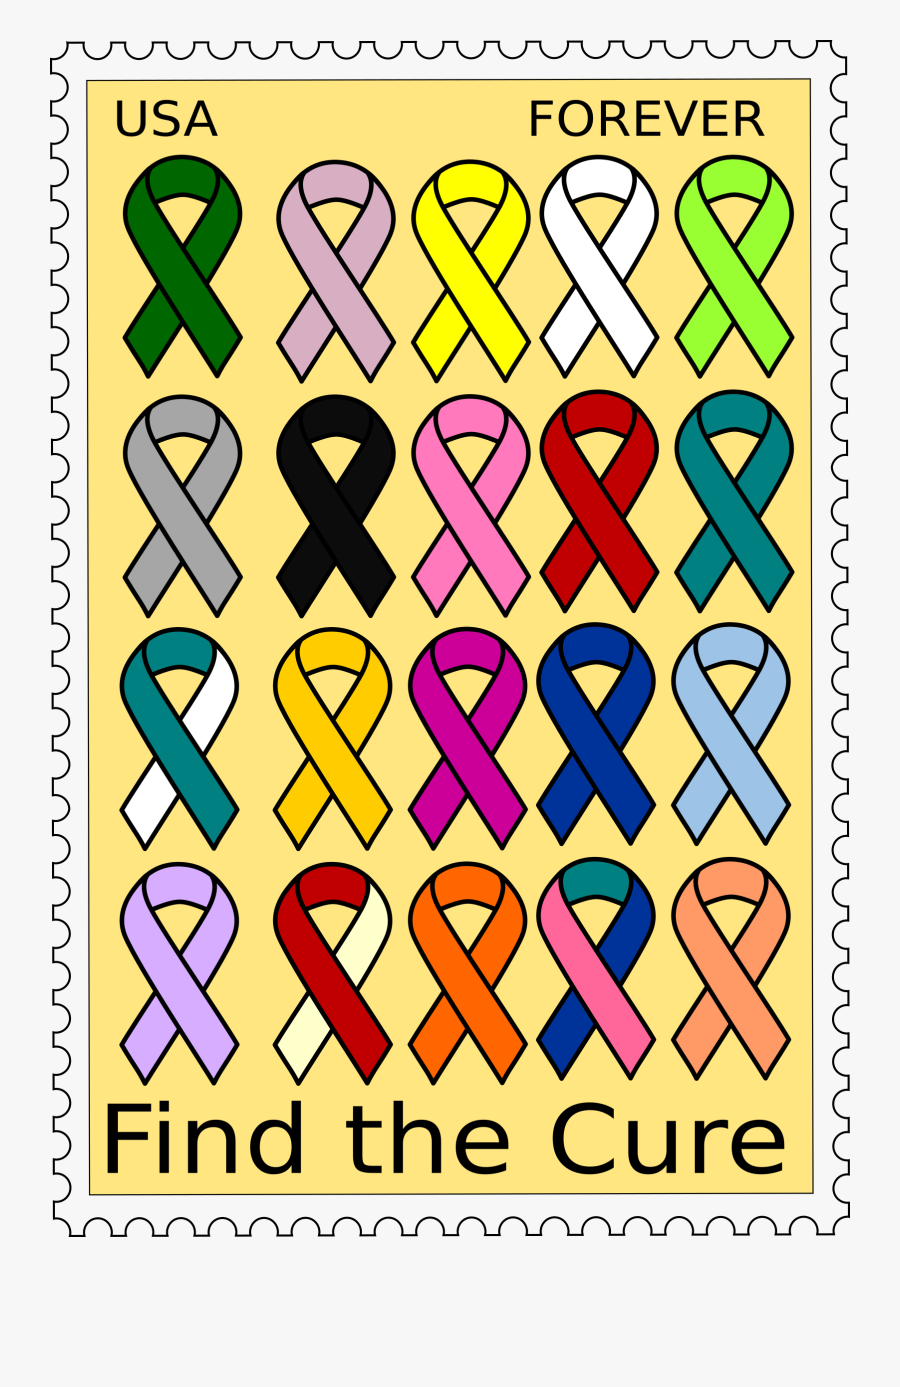 Cancer Ribbons Stamp Clip Arts - All Cancer Ribbon Png, Transparent Clipart